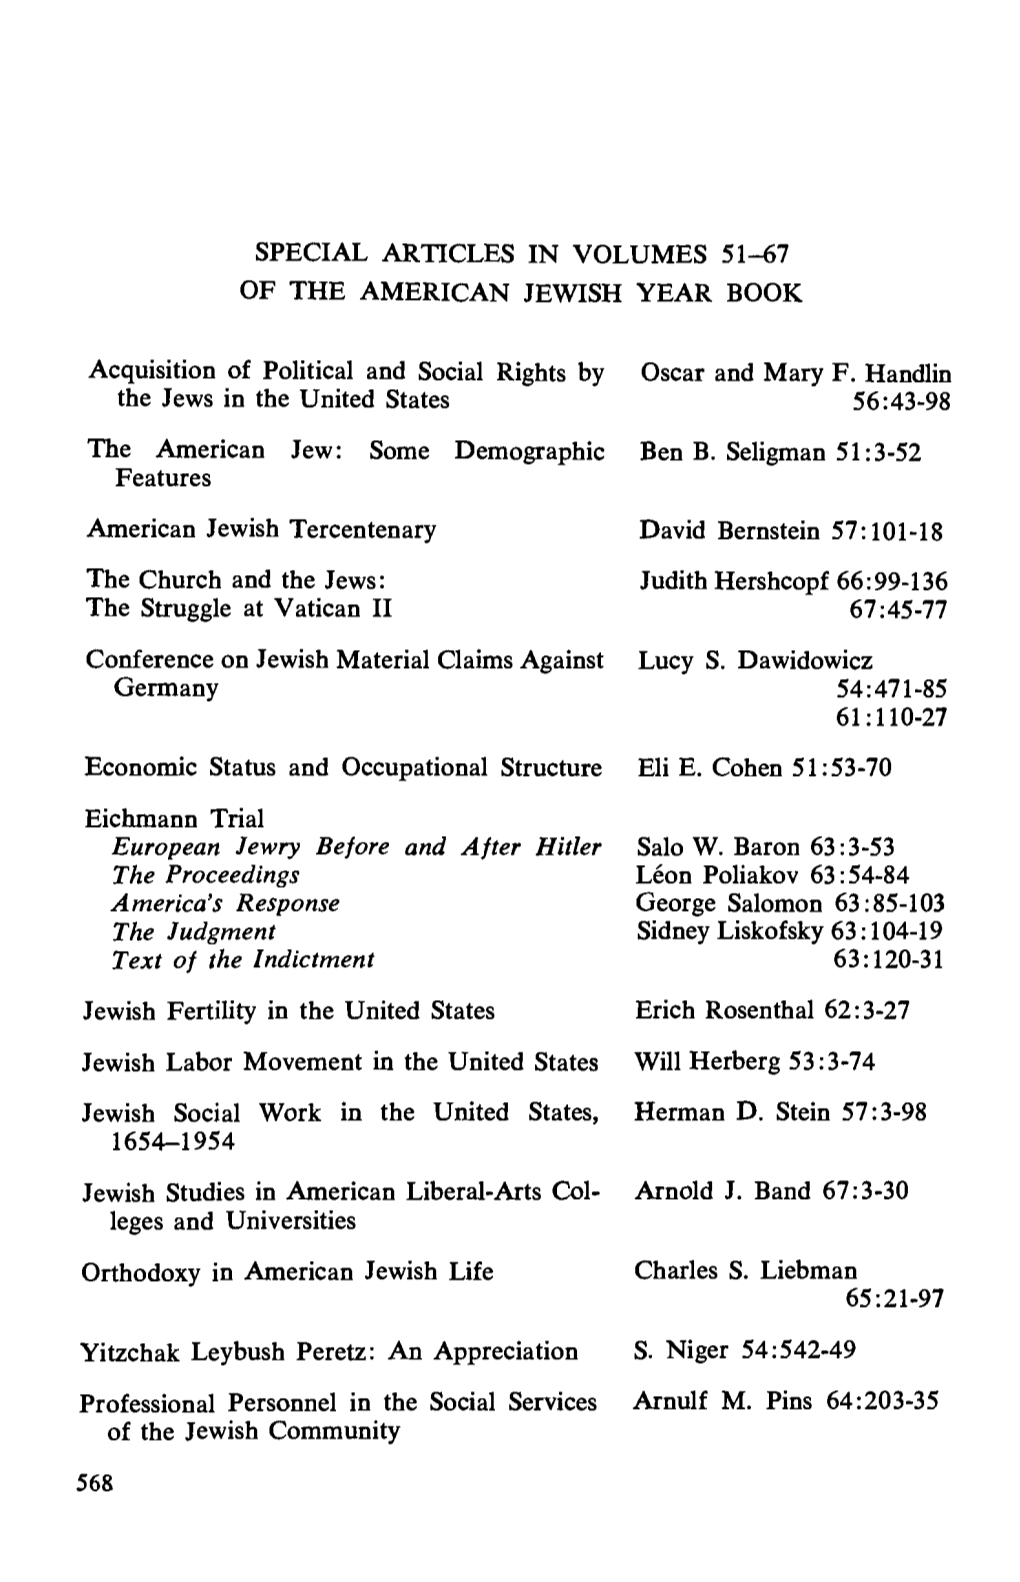 Special Articles in Volumes 51-67 of the American Jewish Year Book